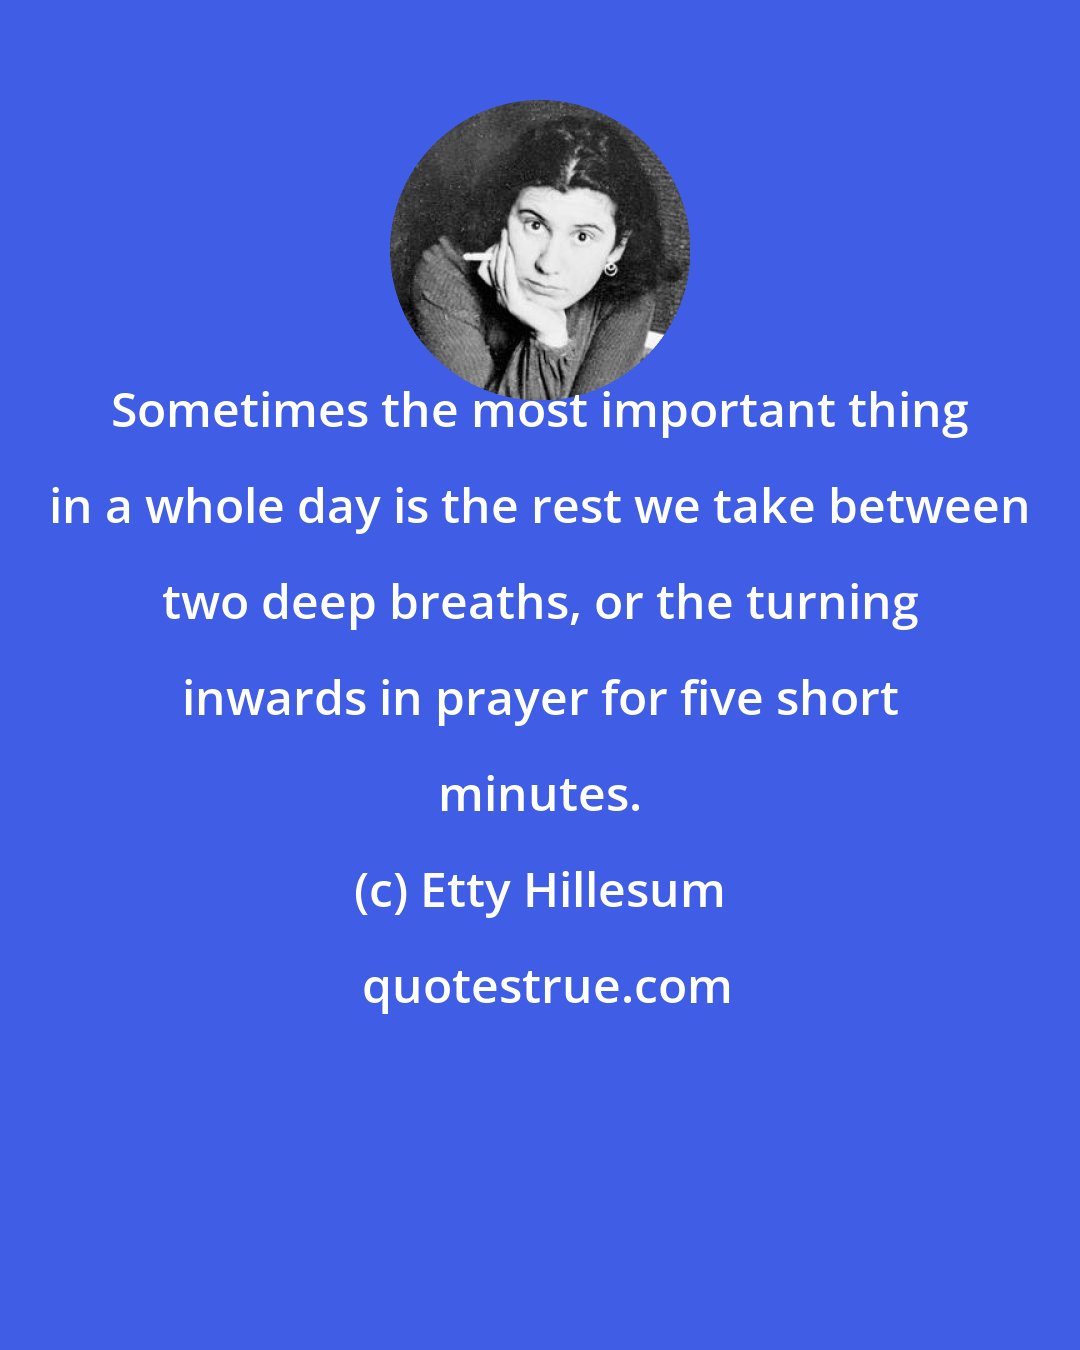 Etty Hillesum: Sometimes the most important thing in a whole day is the rest we take between two deep breaths, or the turning inwards in prayer for five short minutes.